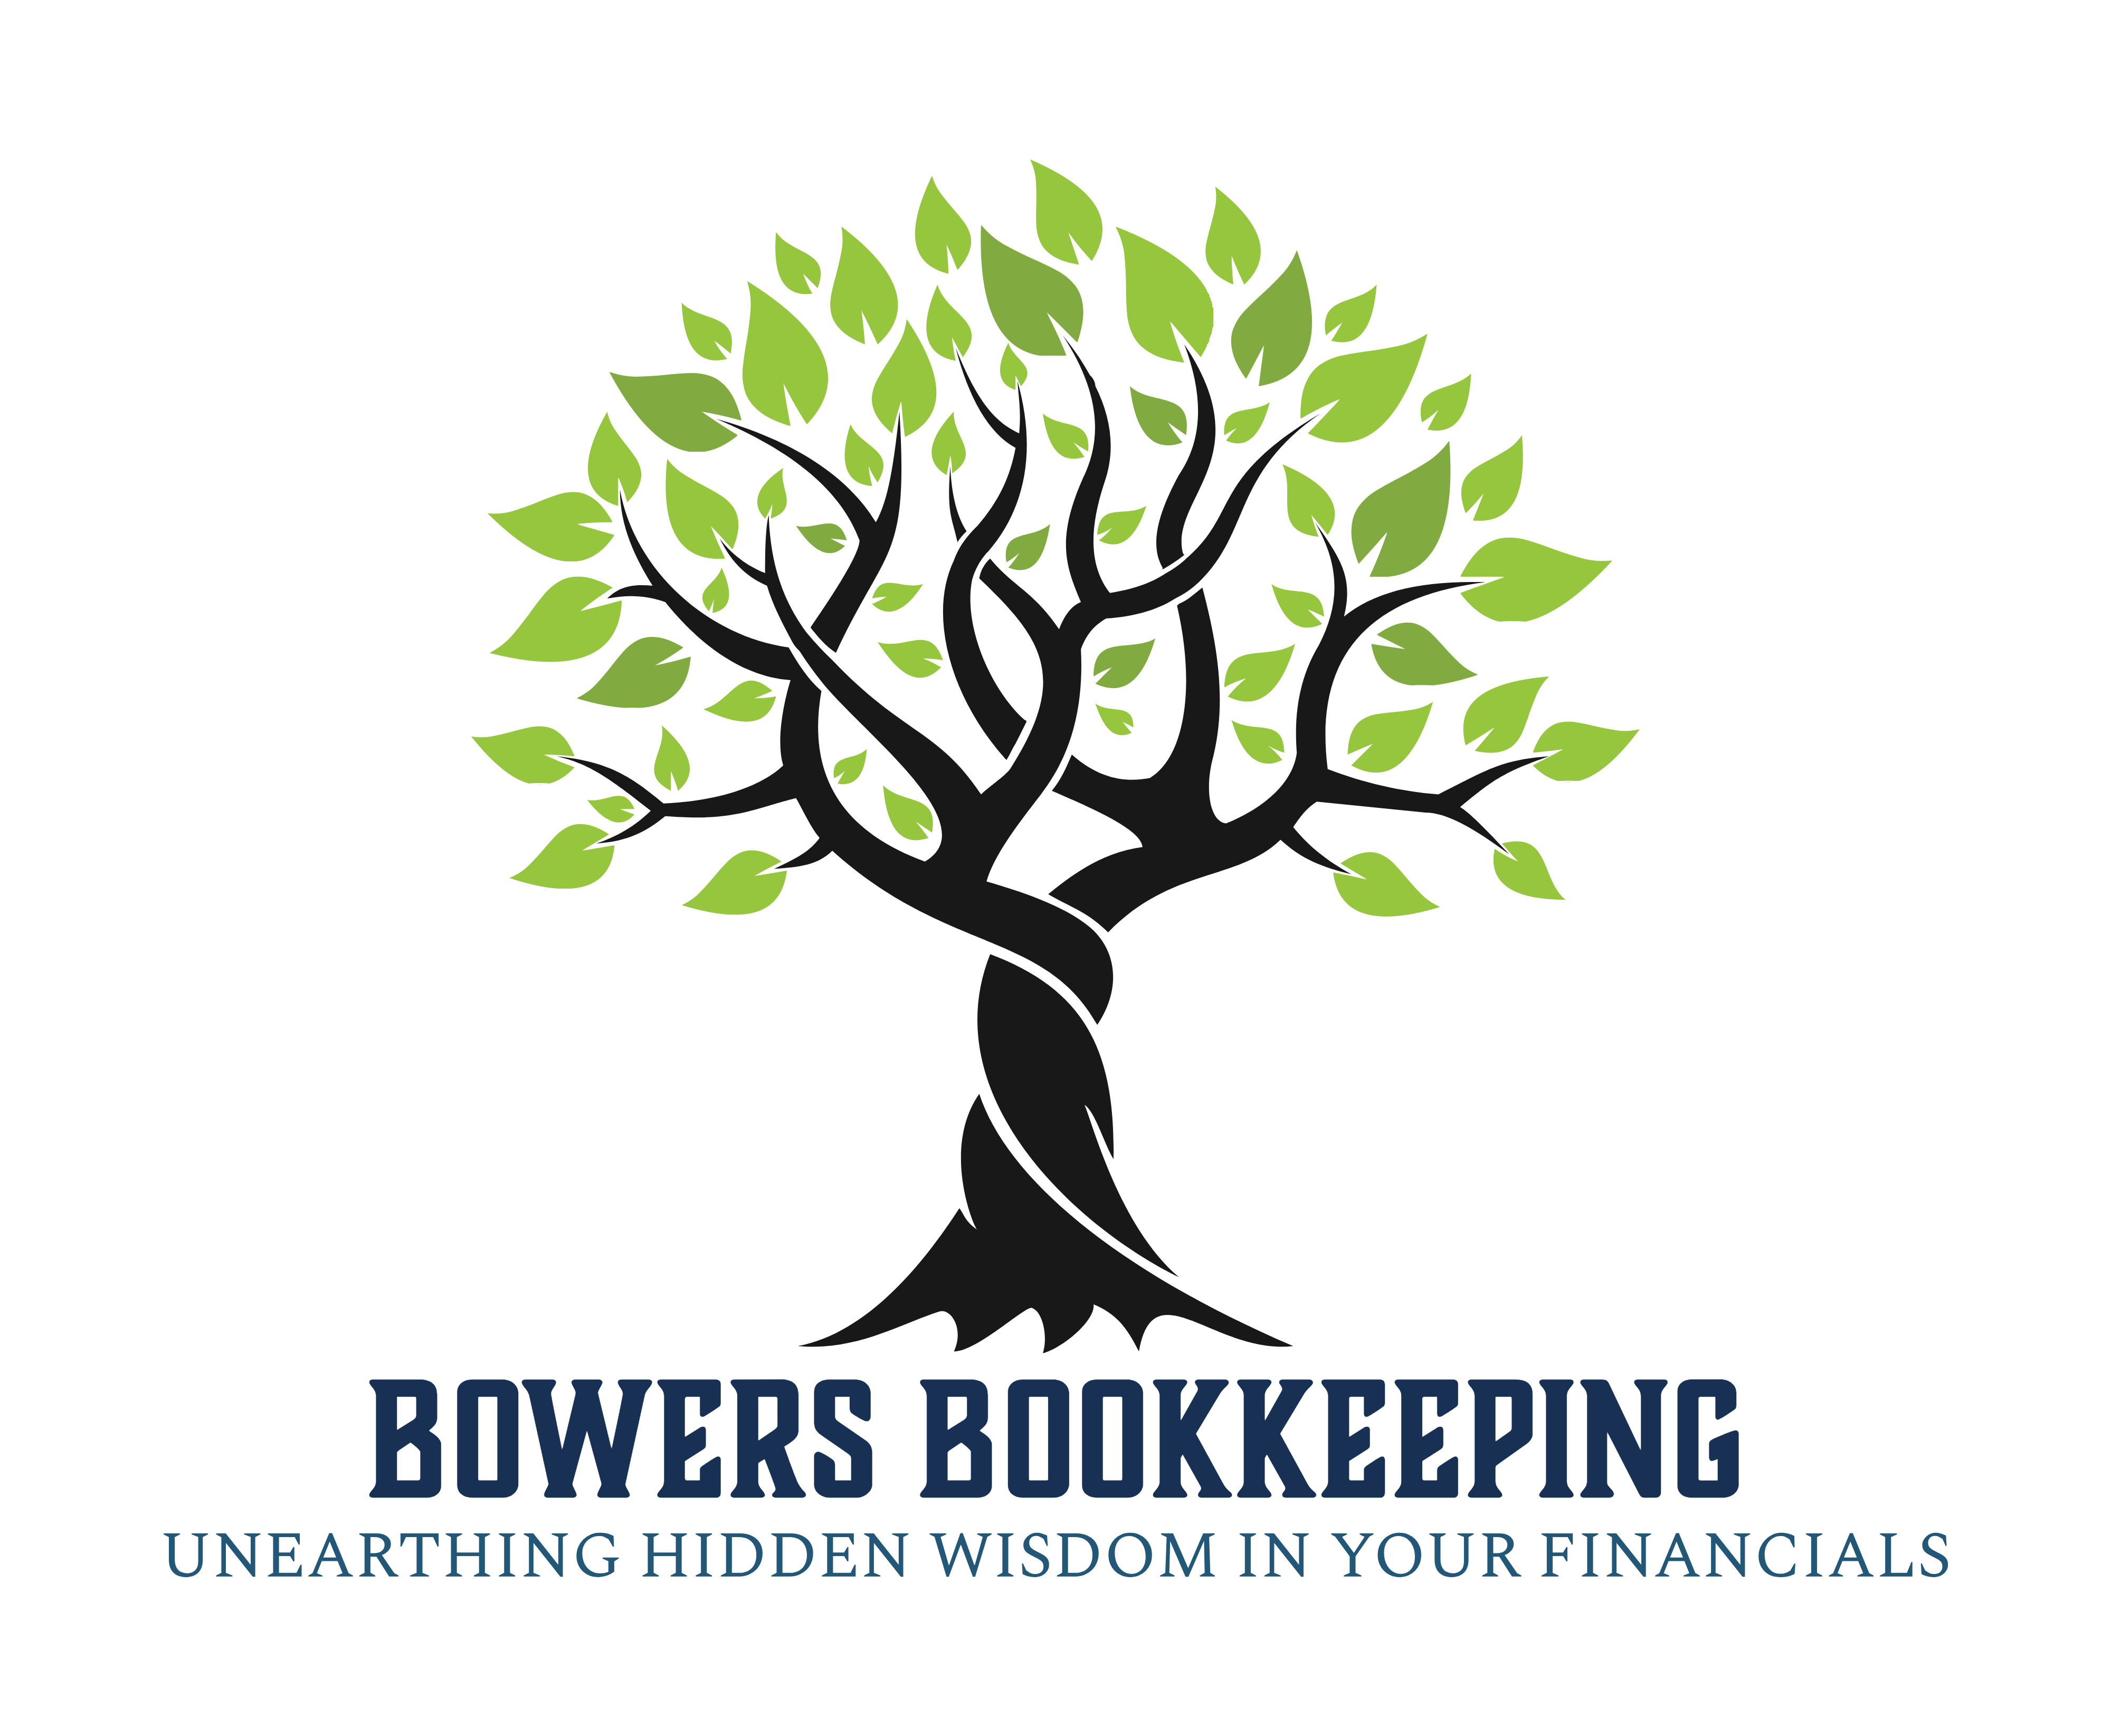 Bowers Bookkeeping